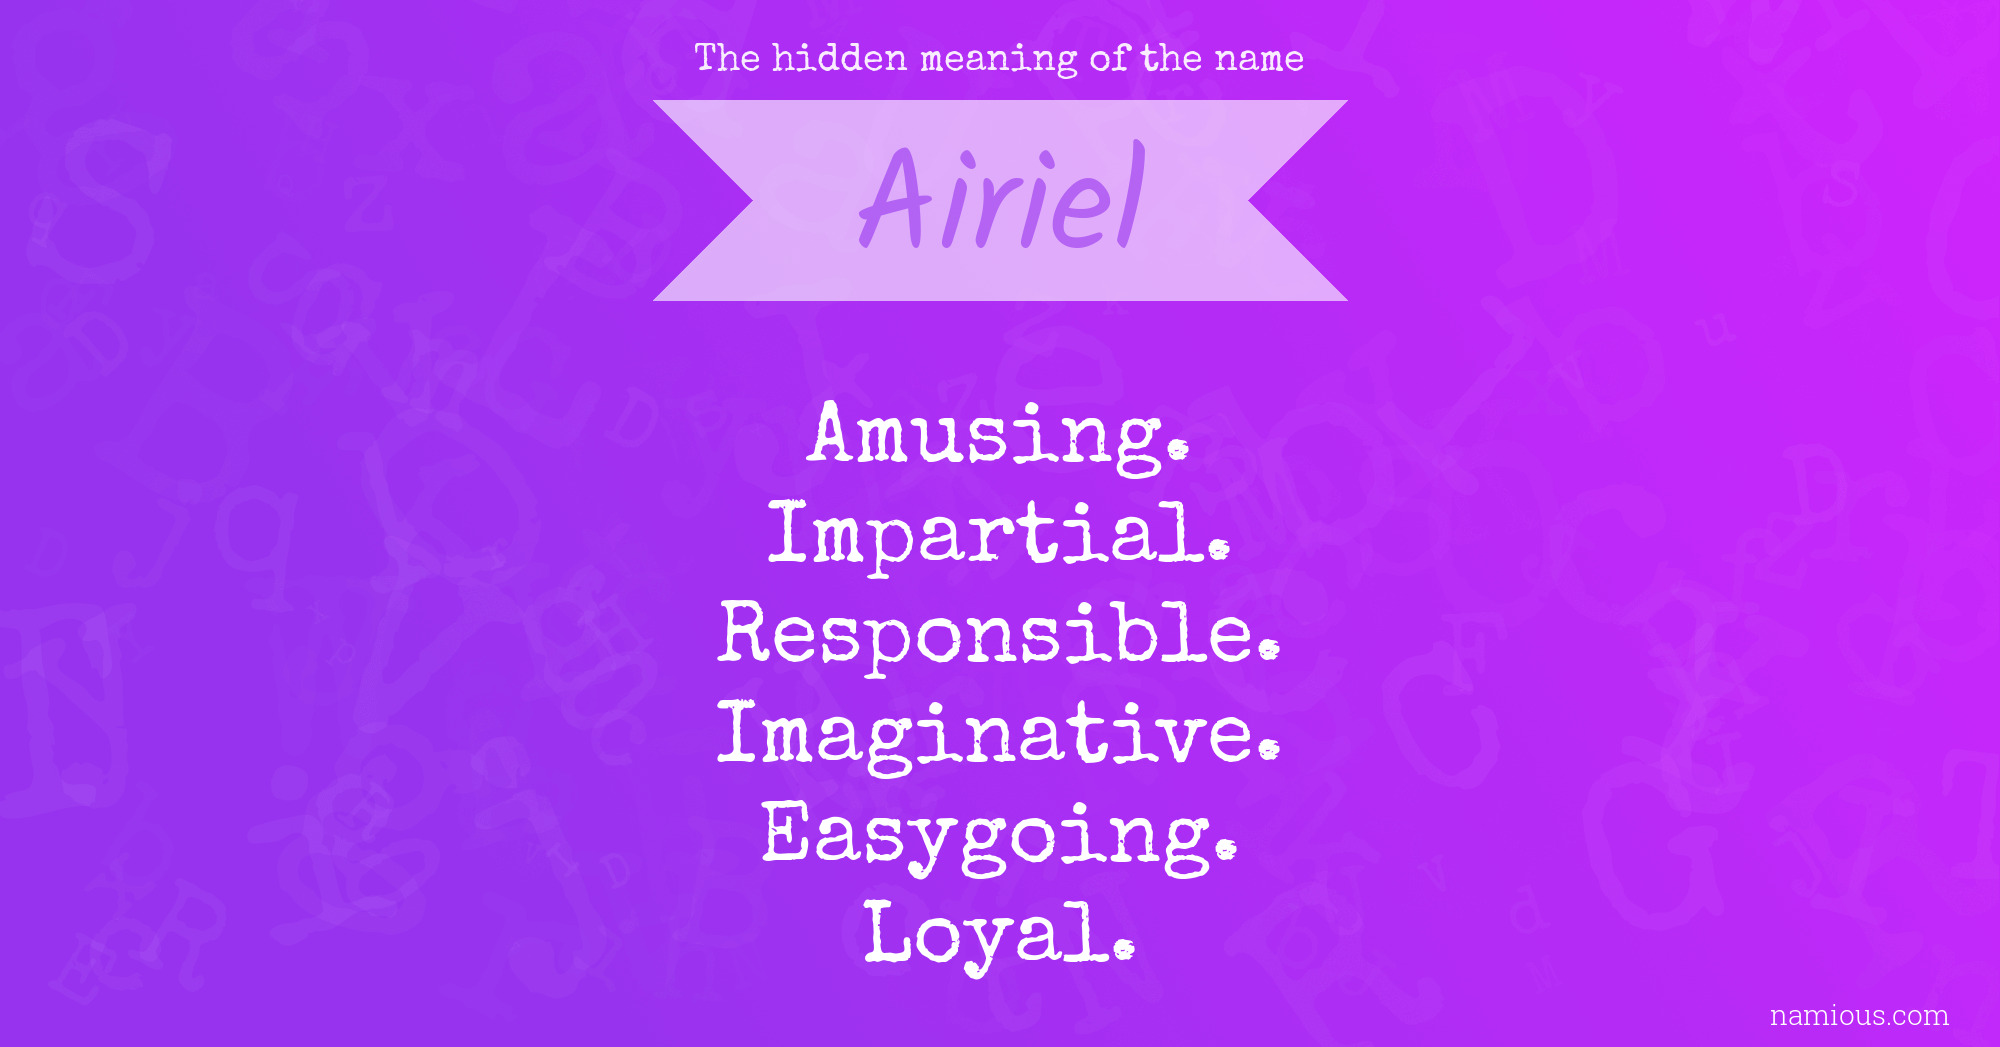 The hidden meaning of the name Airiel